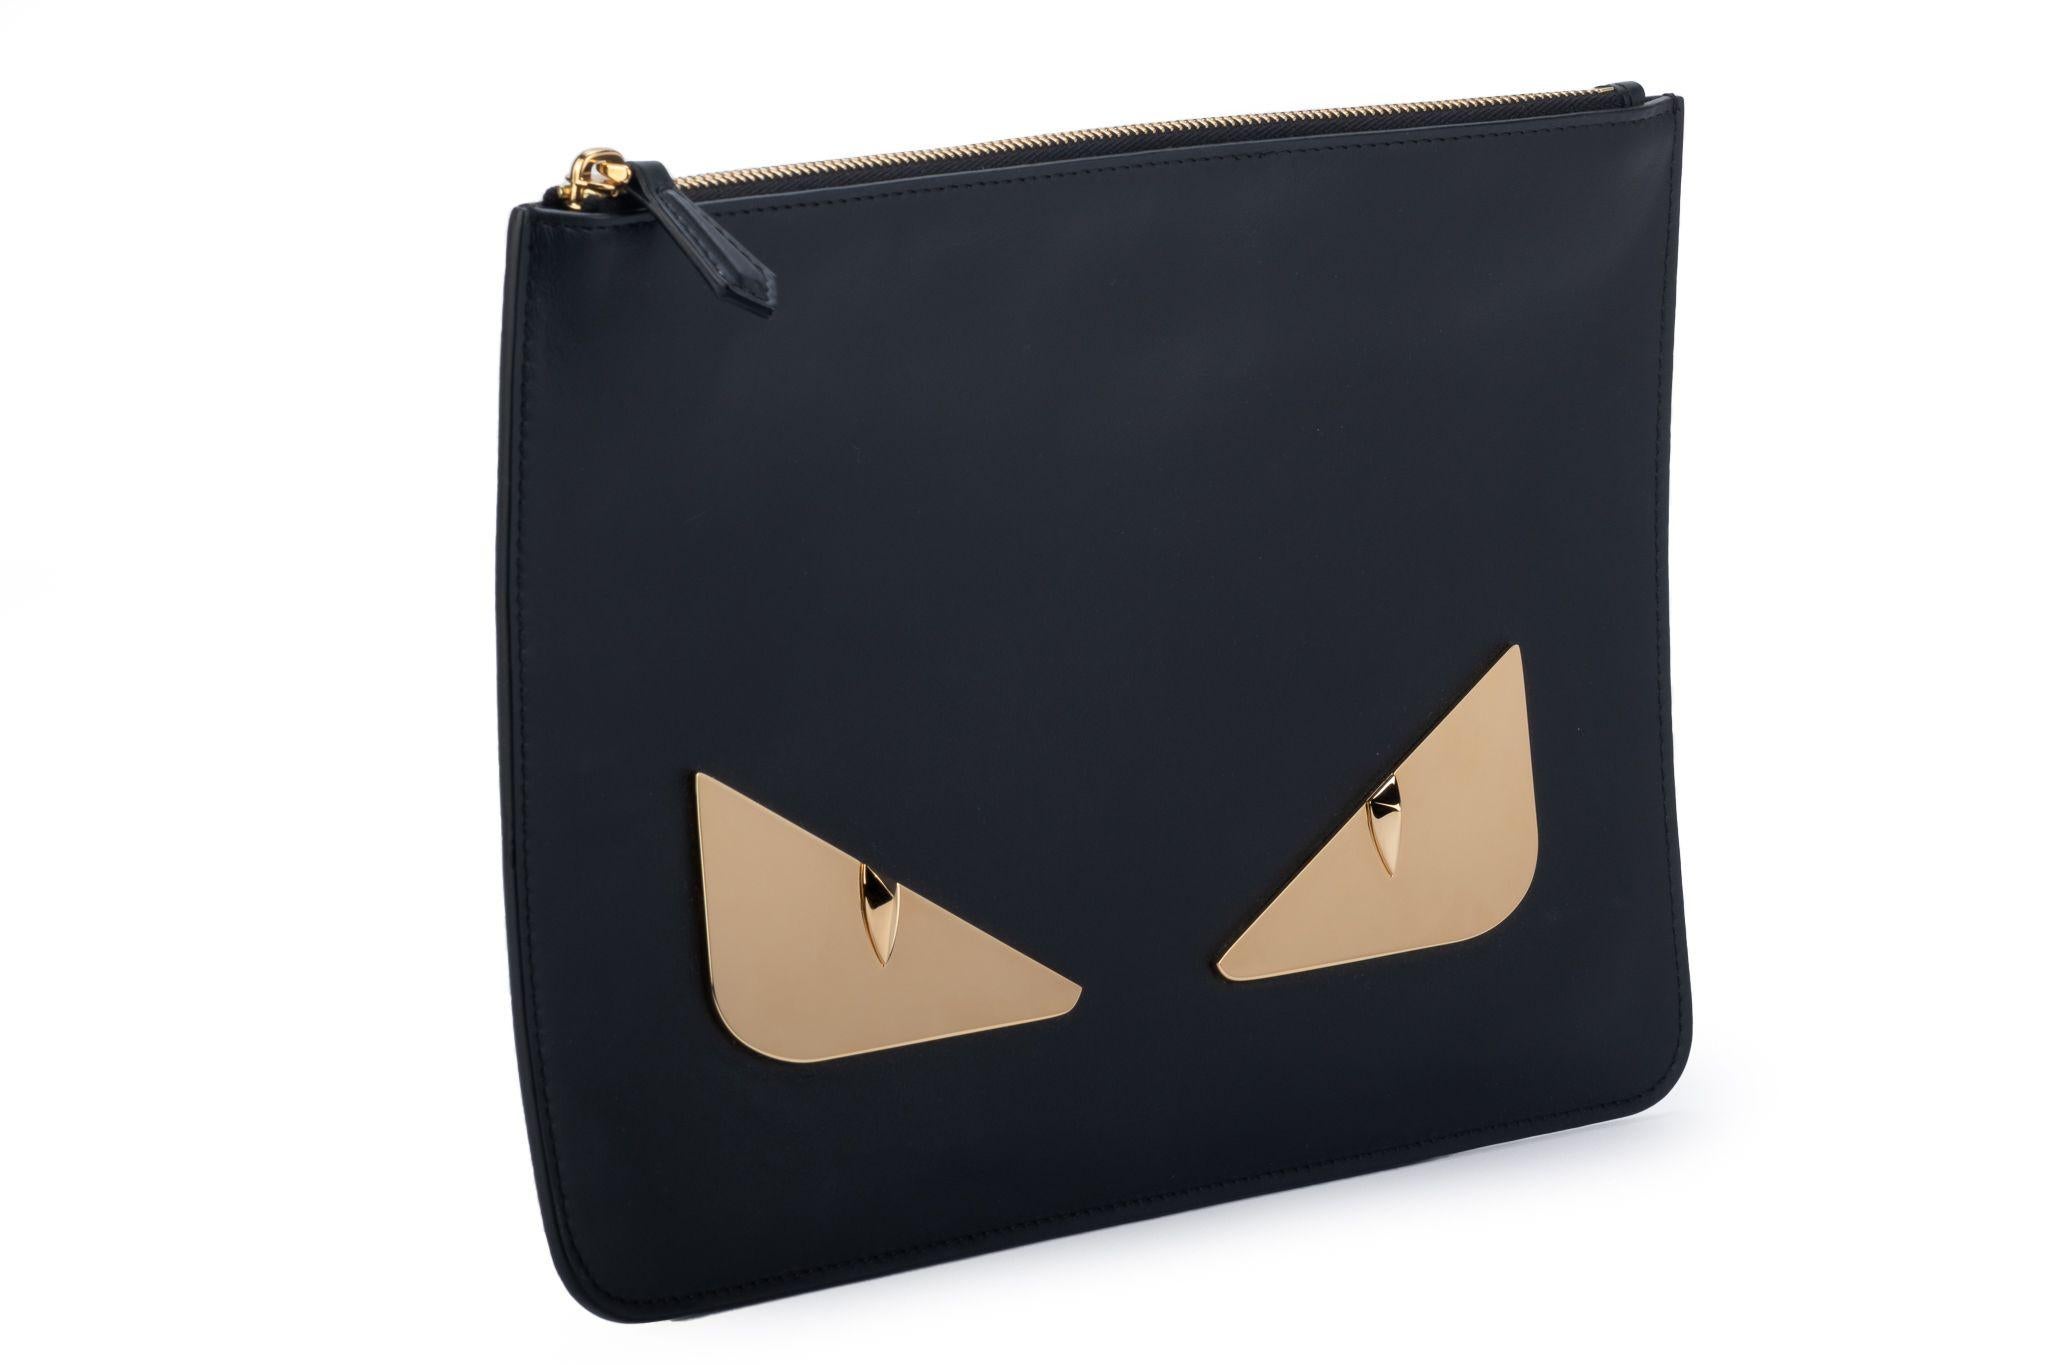 Fendi new limited edition matt finish monster black clutch with gold tone eyes. Comes with original dust cover.
